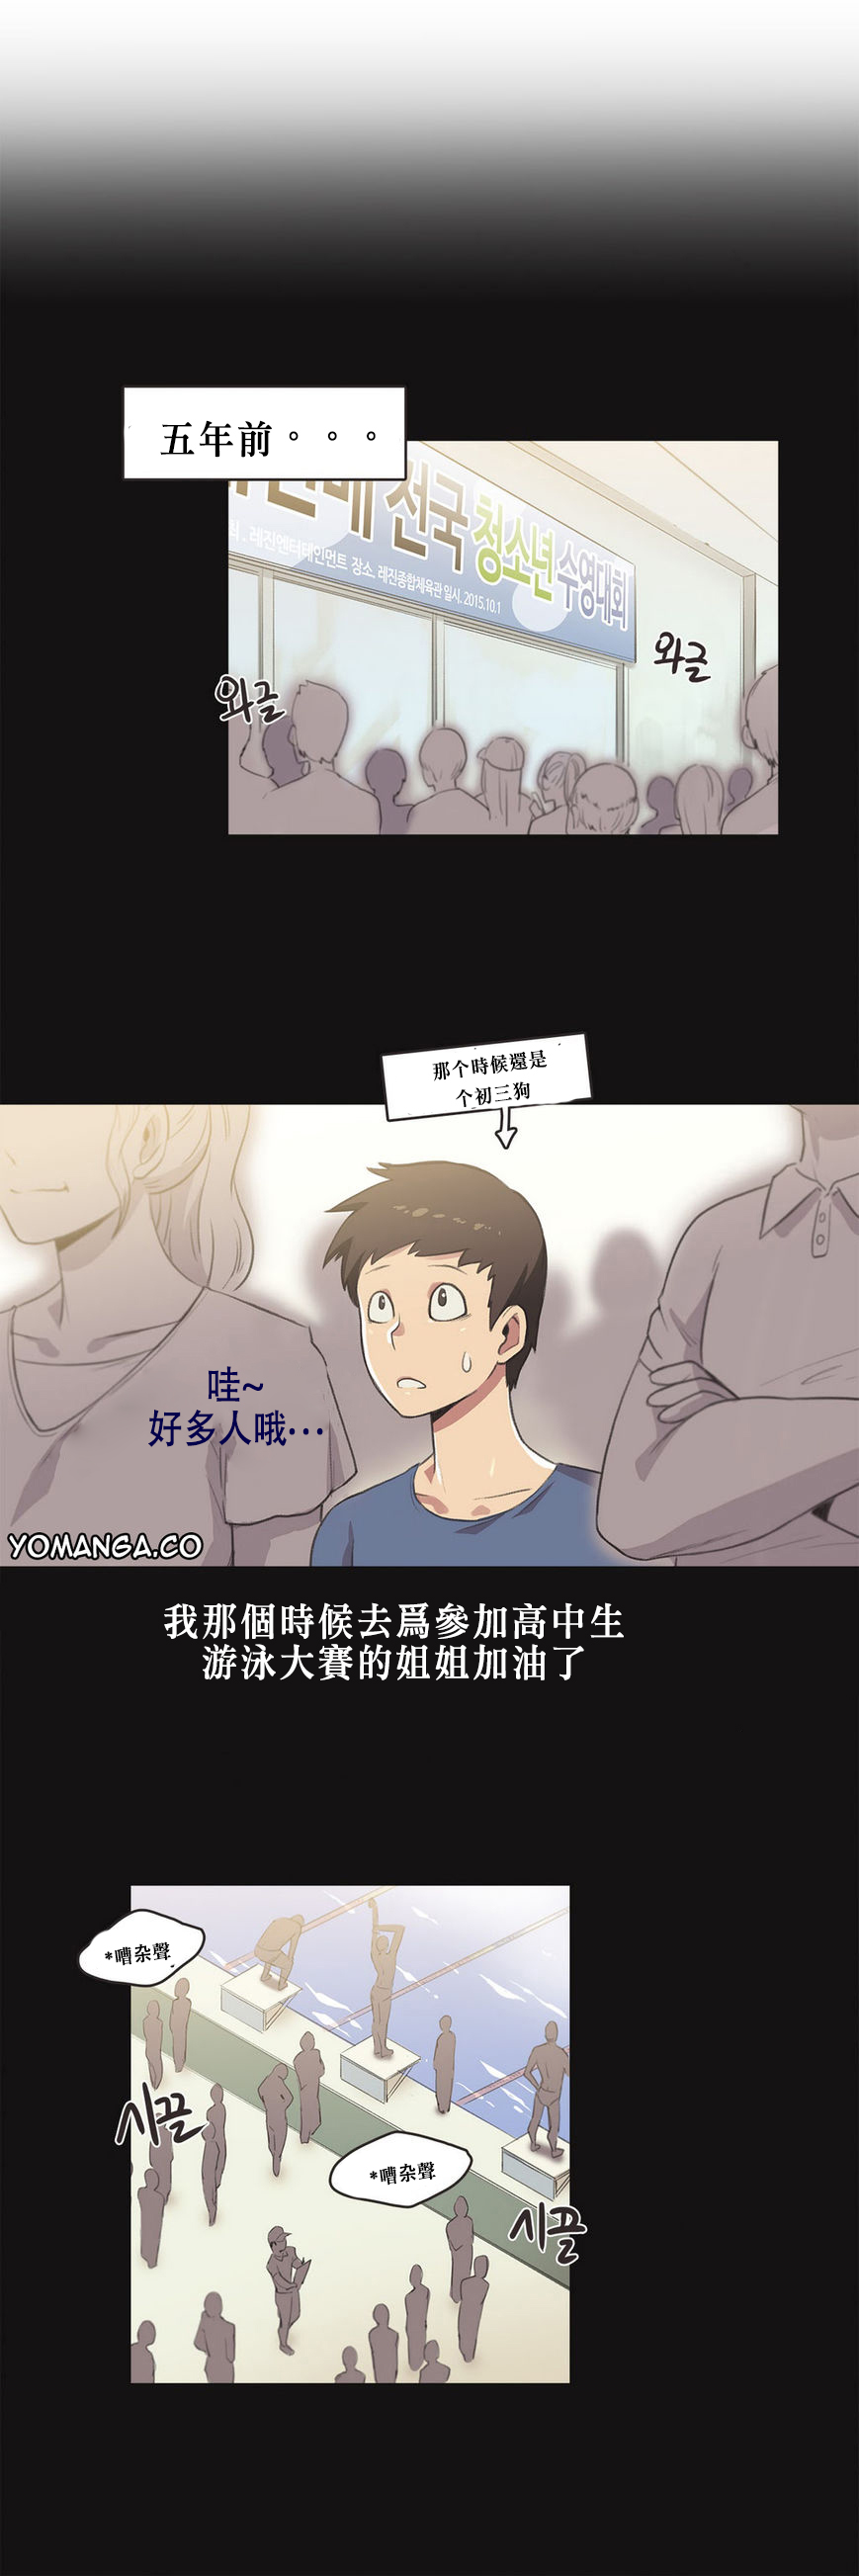 [Gamang] Sports Girl Ch.5 [Chinese] [高麗個人漢化] 